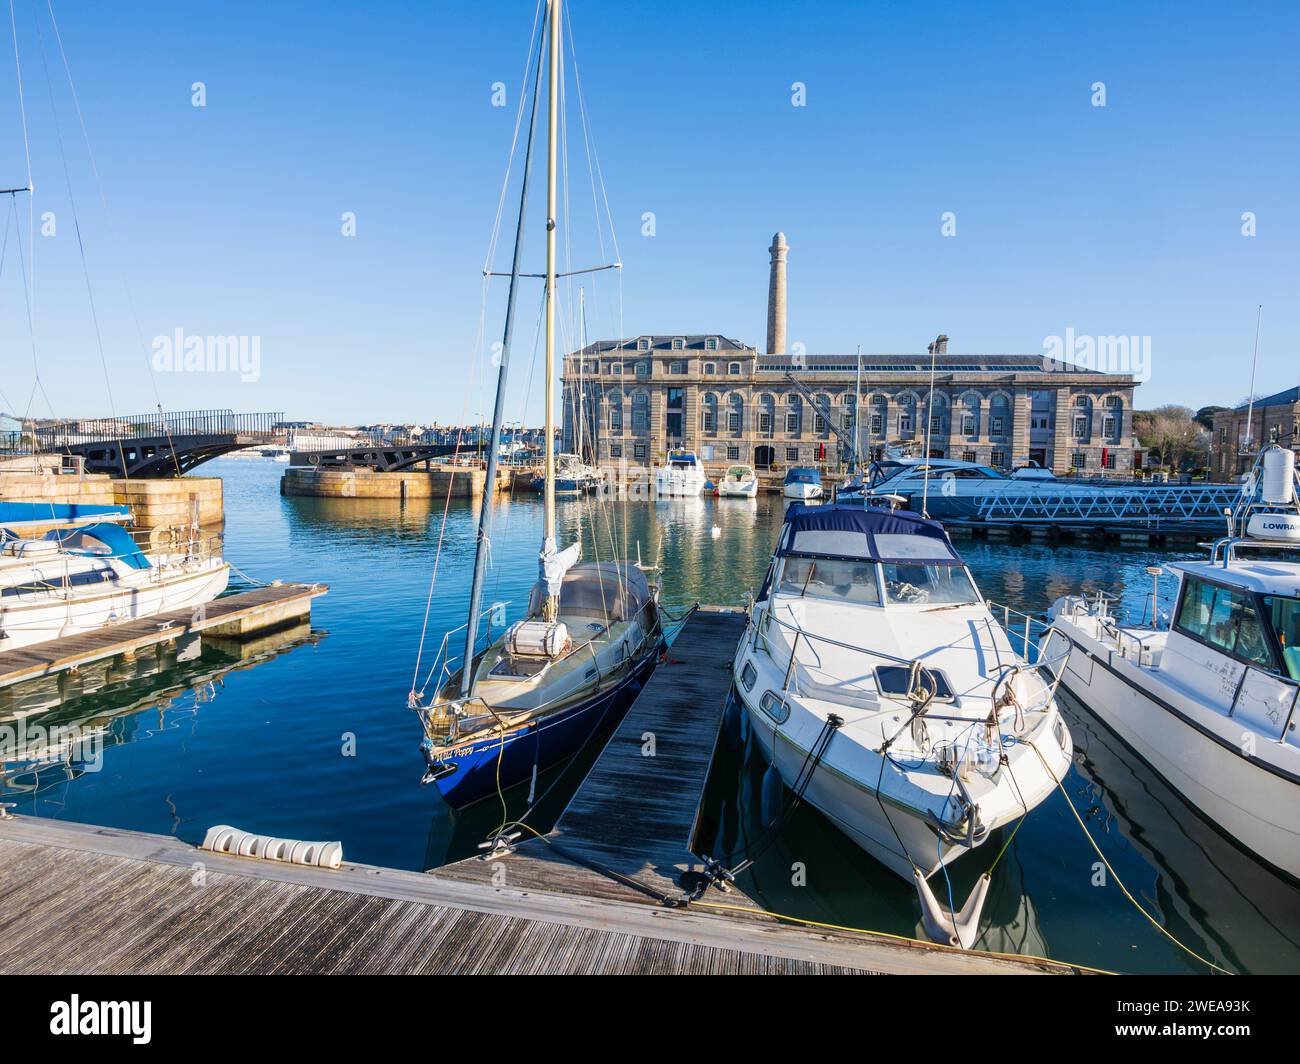 Harbour and buildings of the Royal William yard, Plymouth, UK, now repurposed for residential and other uses Stock Photo